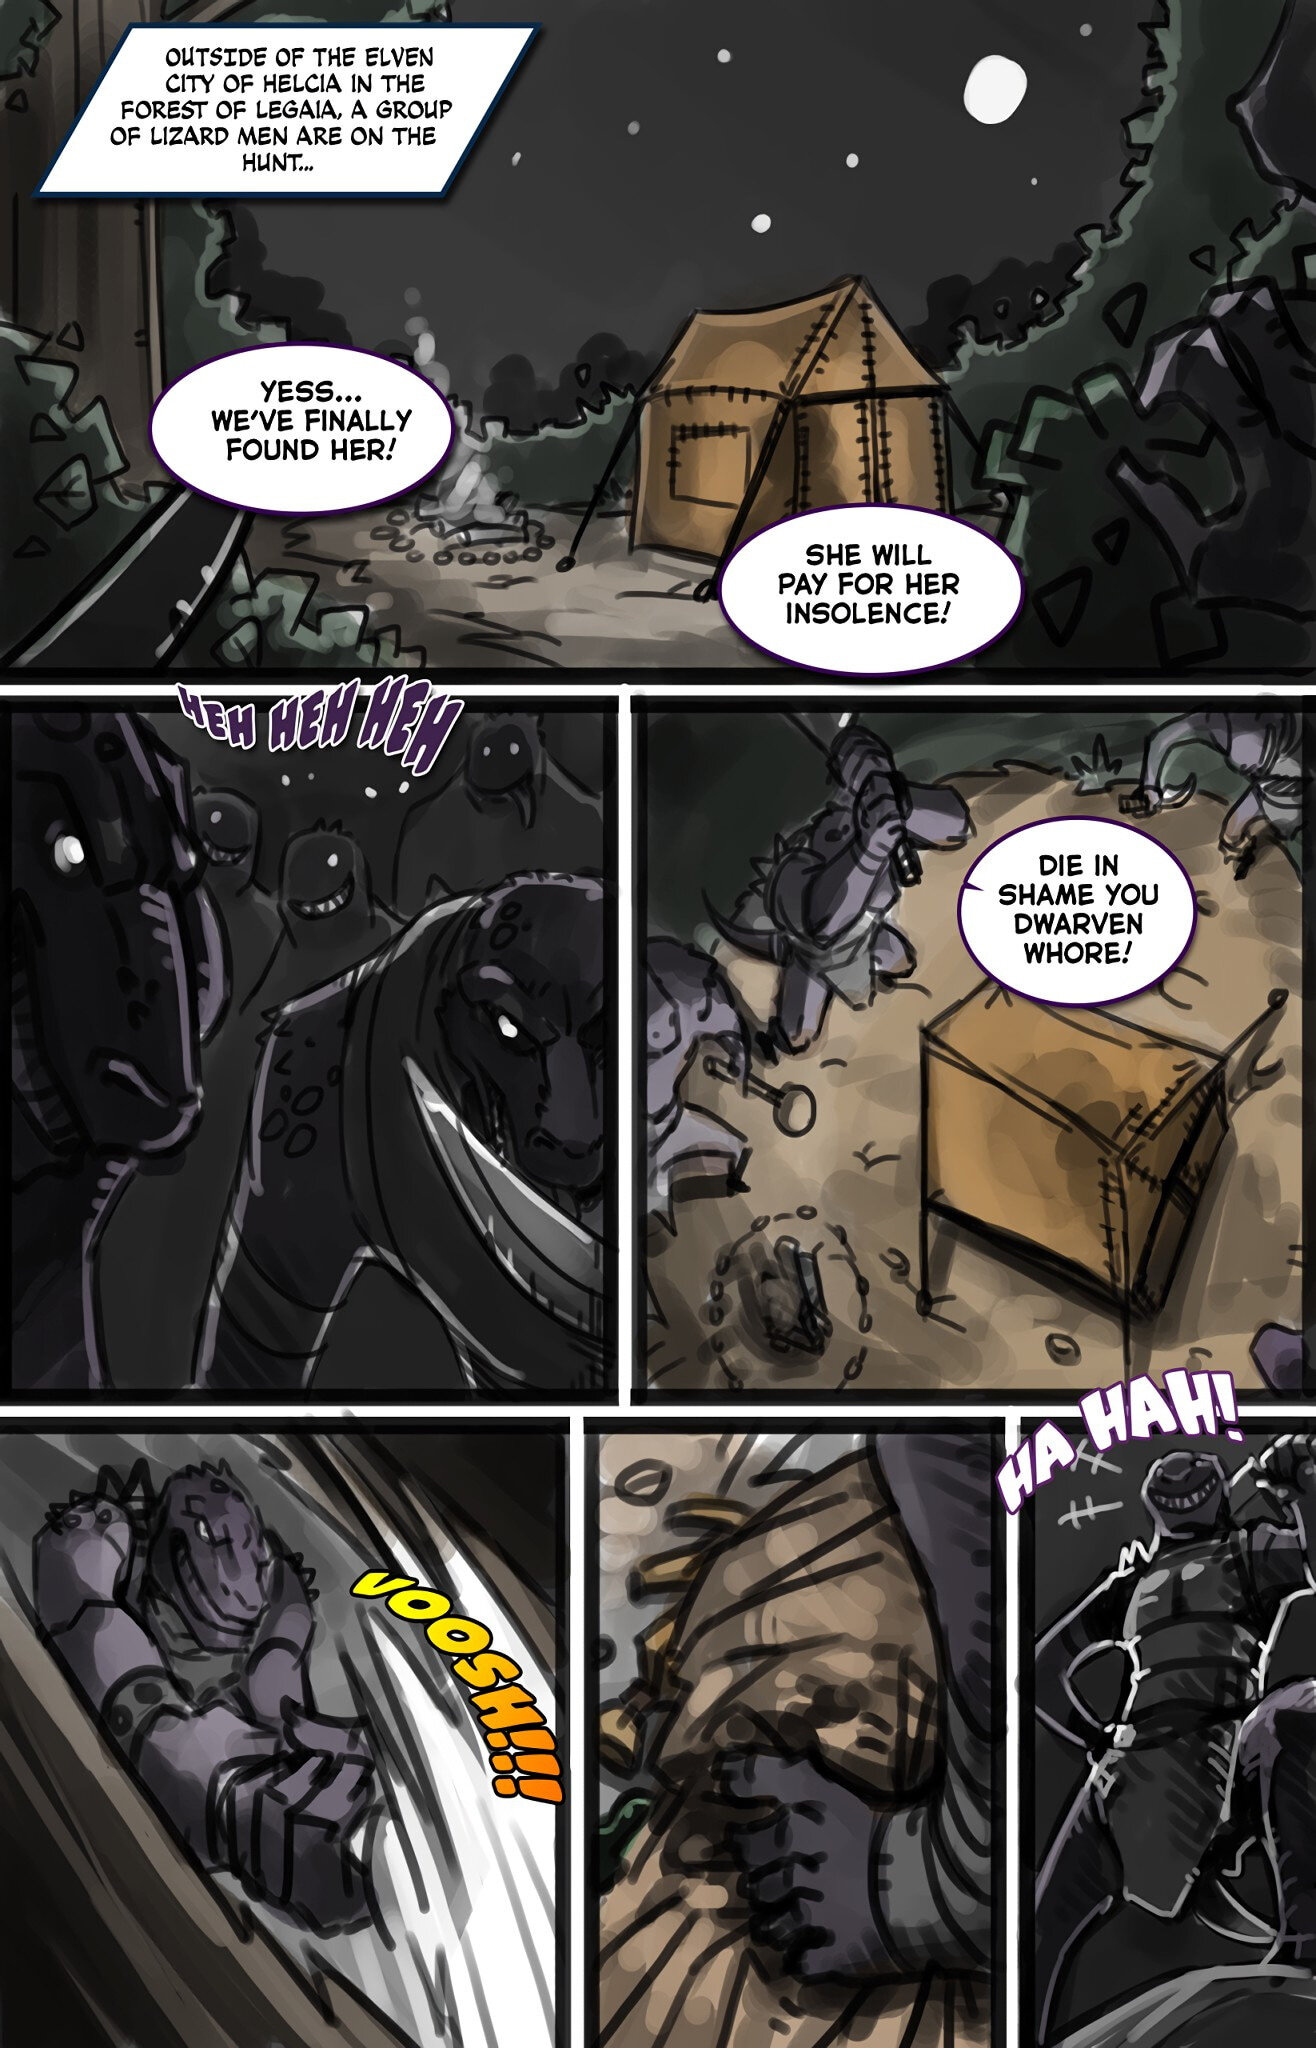 Cheska the Mighty - Page 2